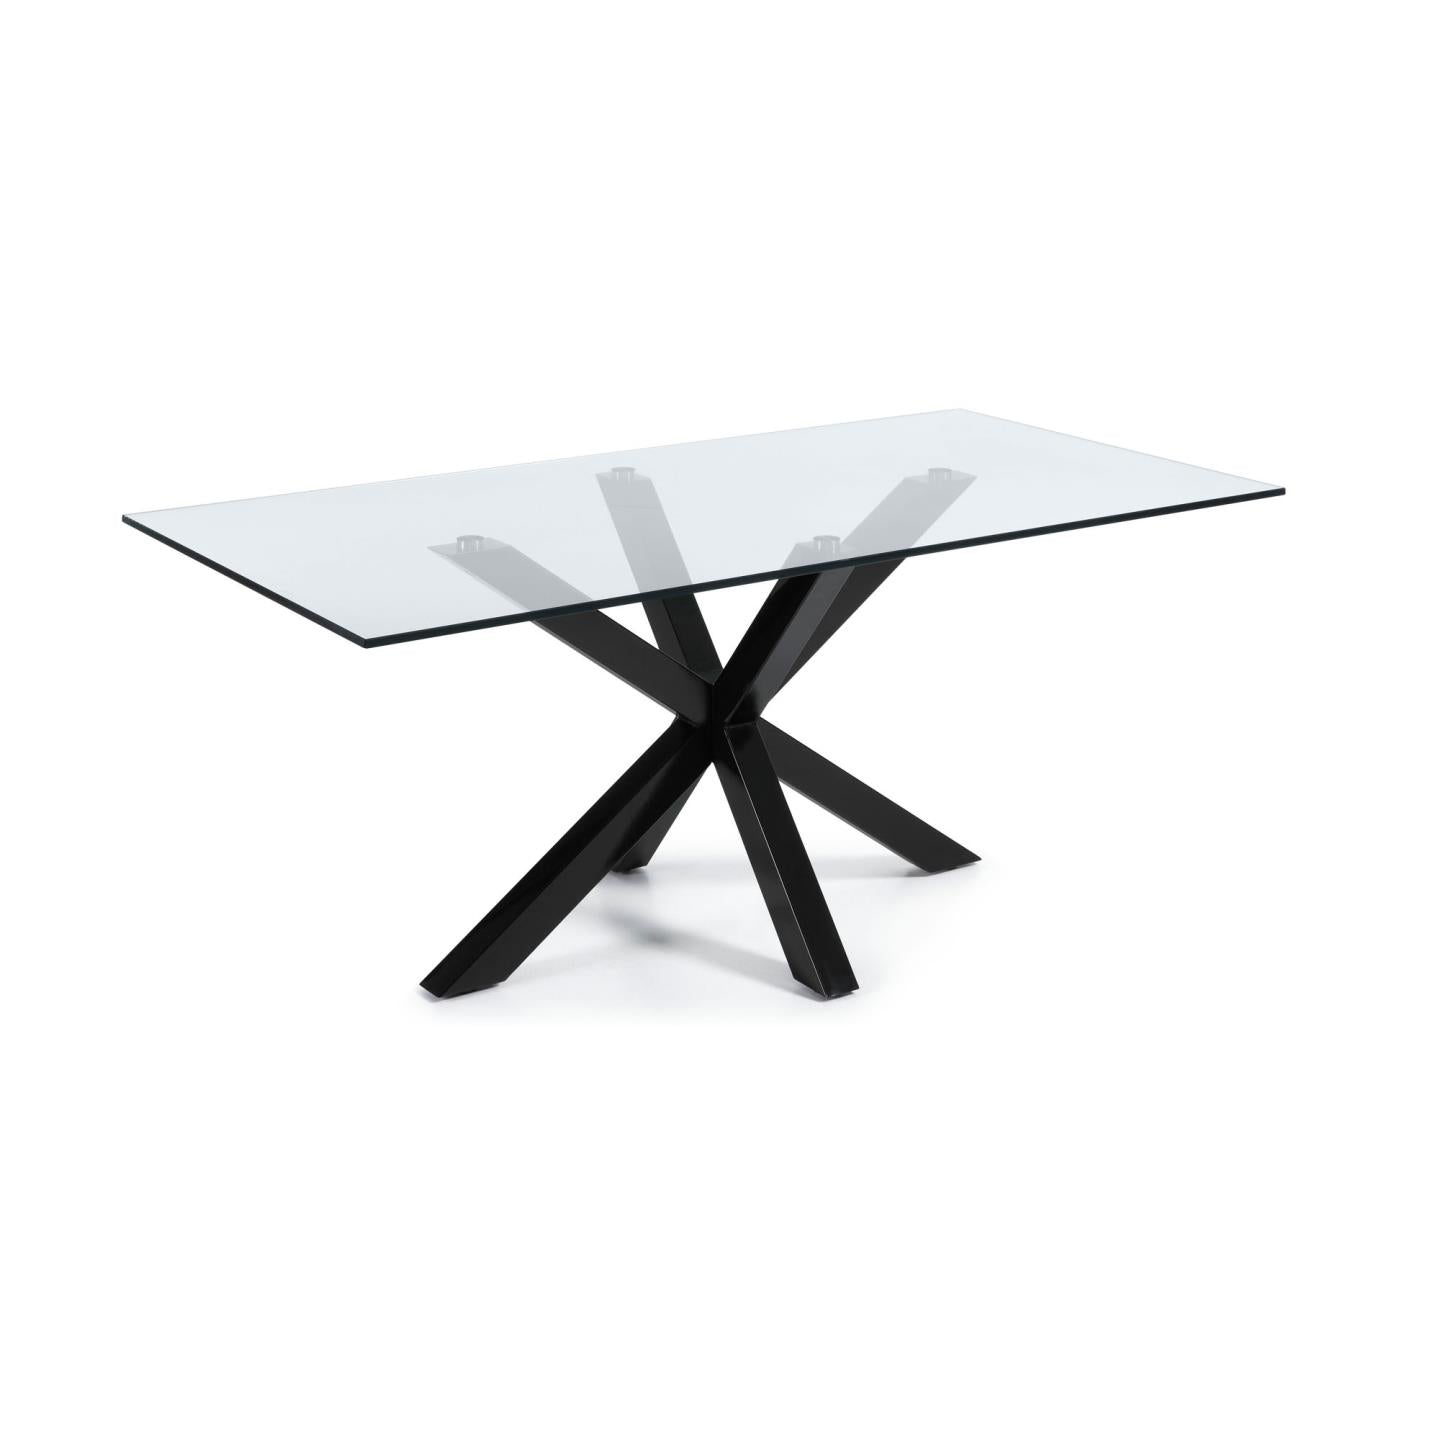 Argo glass table with steel legs with black finish 200 x 100 cm